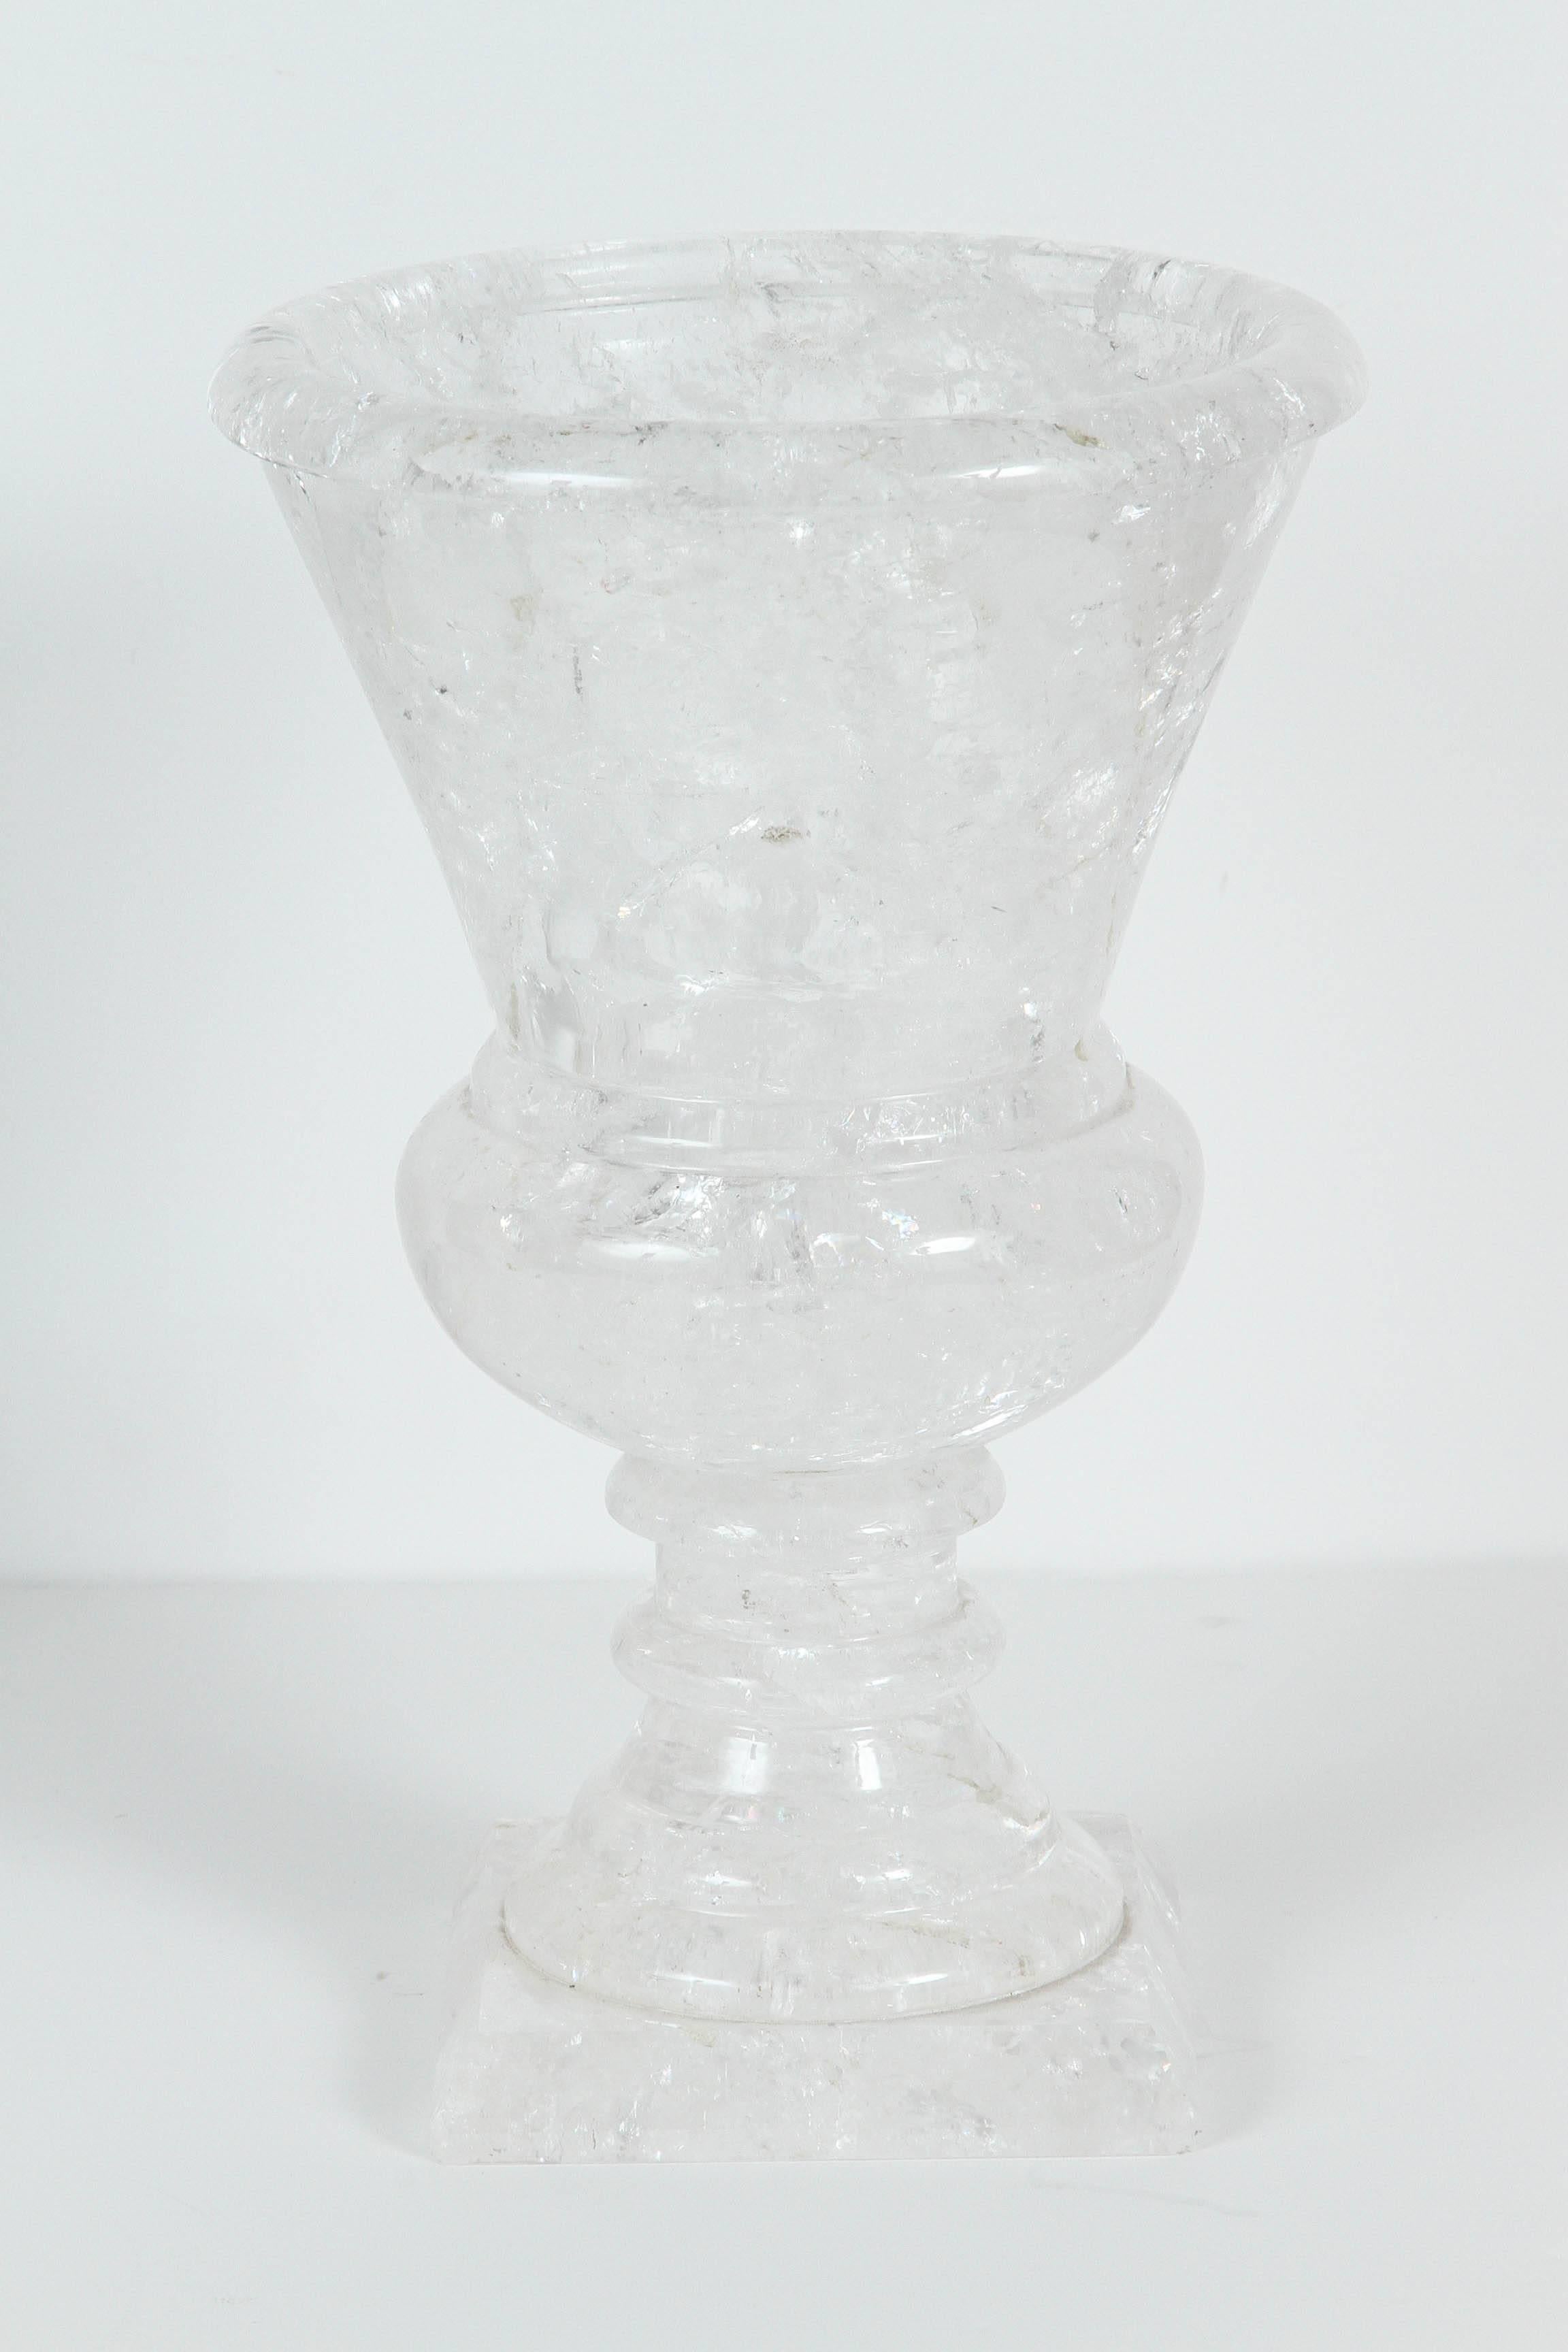 Pair of modern rock crystal pedestal urns. The rock crystal is extremely high quality. The base measurement is 5 inches. The price below is for a pair but there are others available.